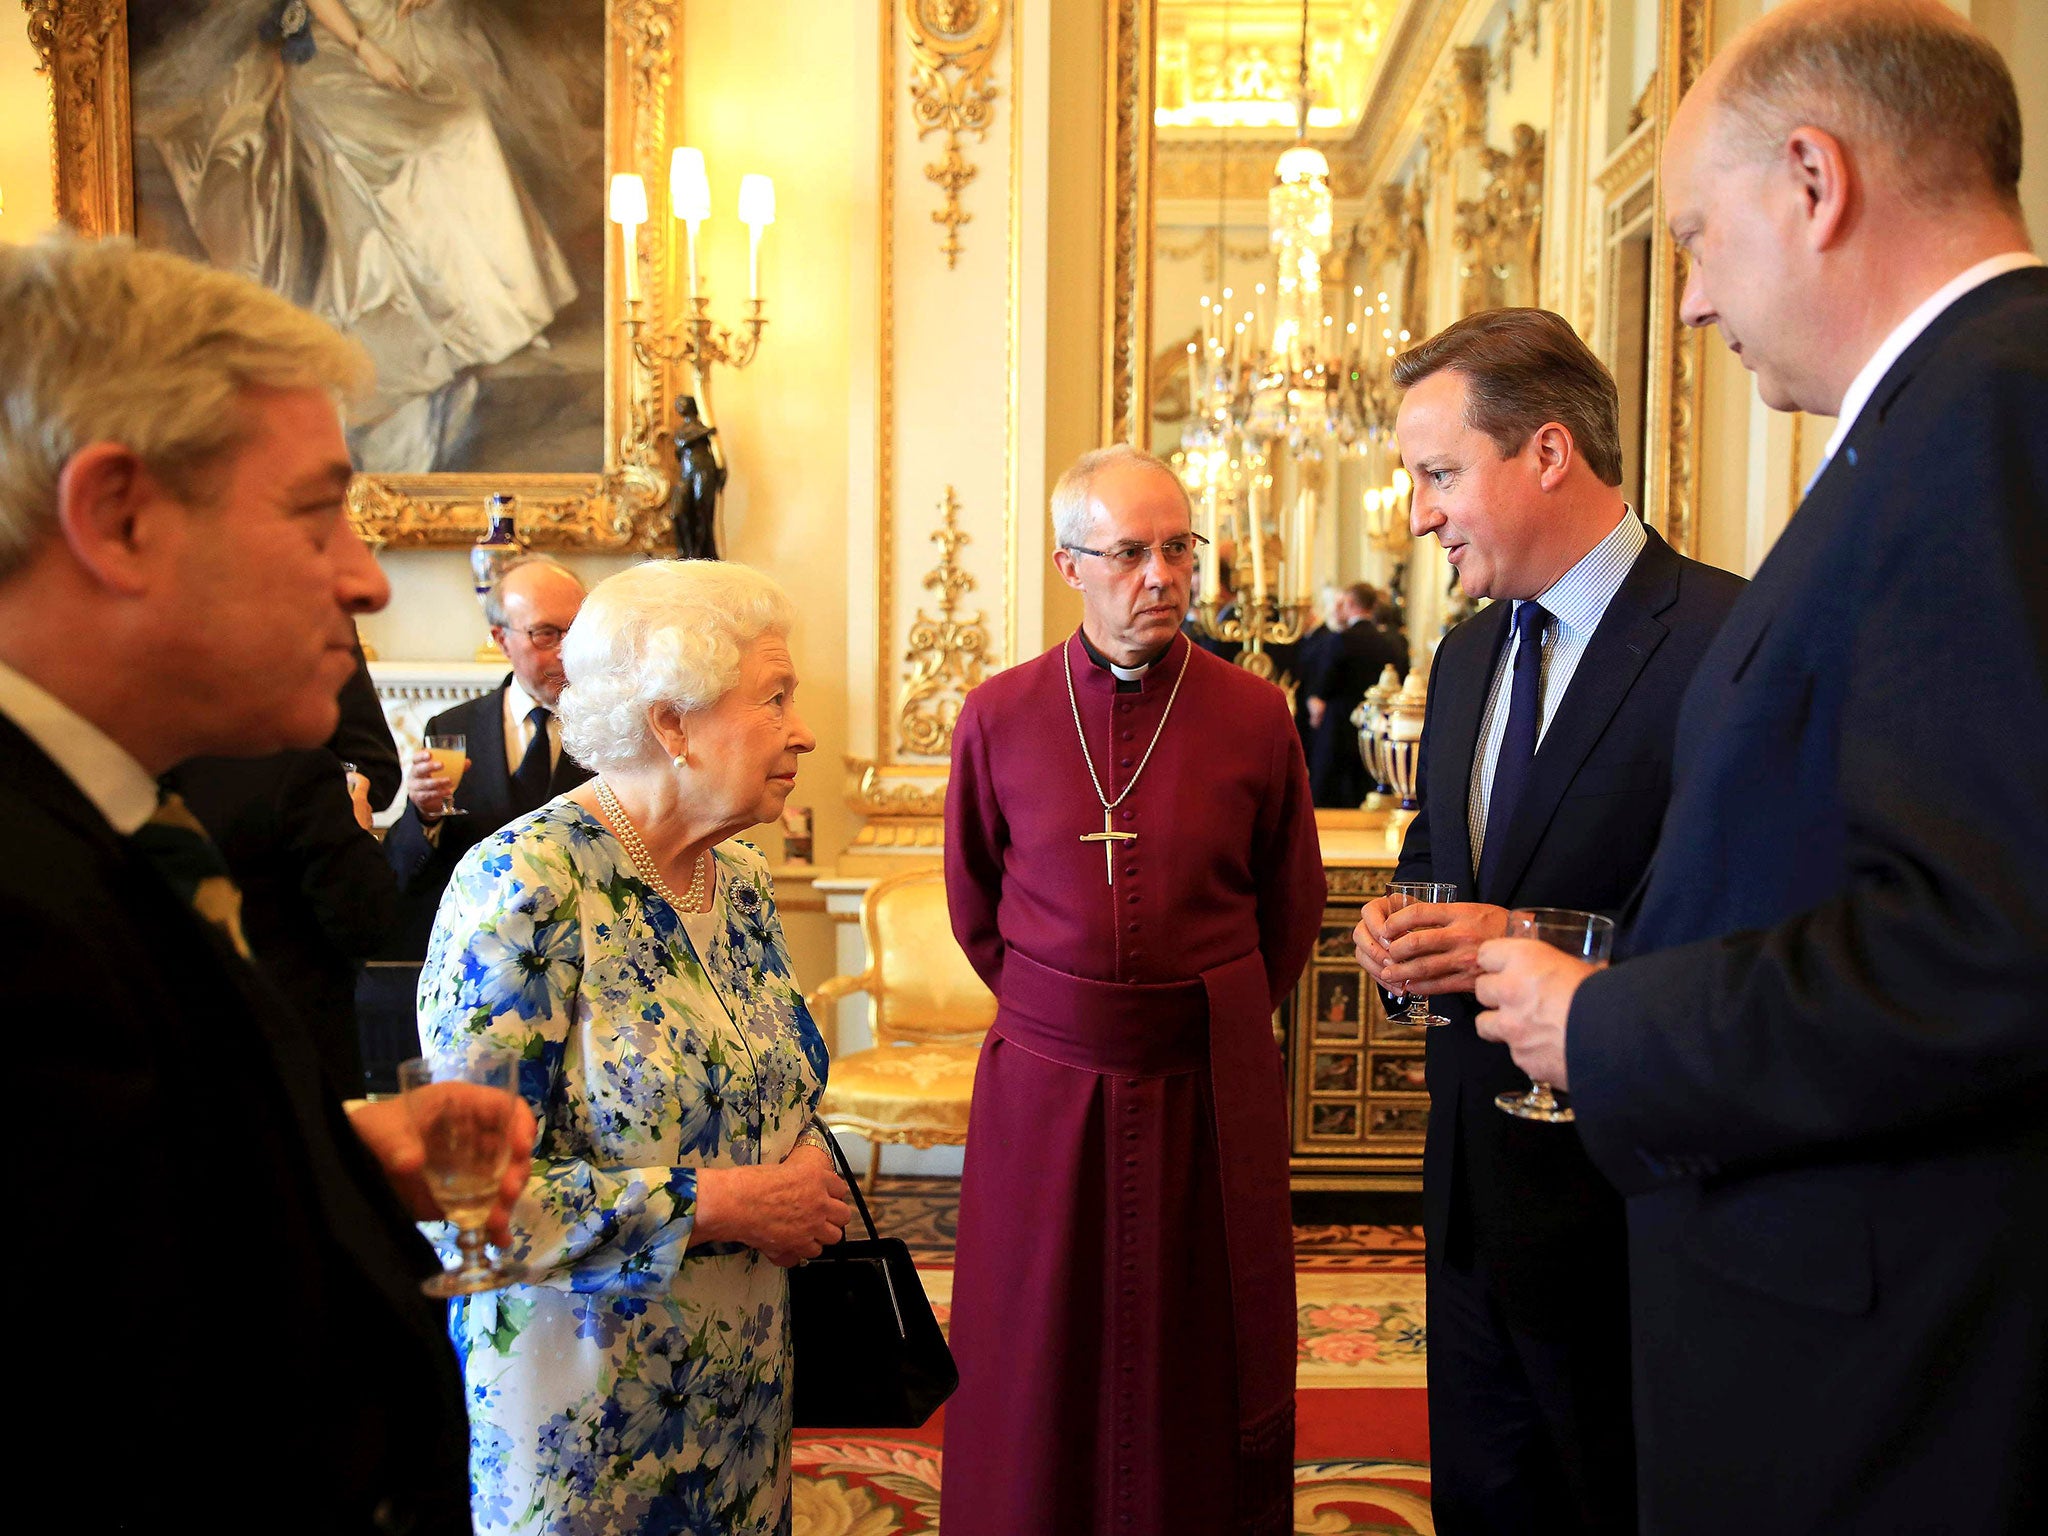 The Queen speaks to David Cameron during a reception in Buckingham Palace, as Chris Grayling (R), leader of the House of Commons John Bercow (L) and Archbishop of Canterbury Justin Welby (C) look on